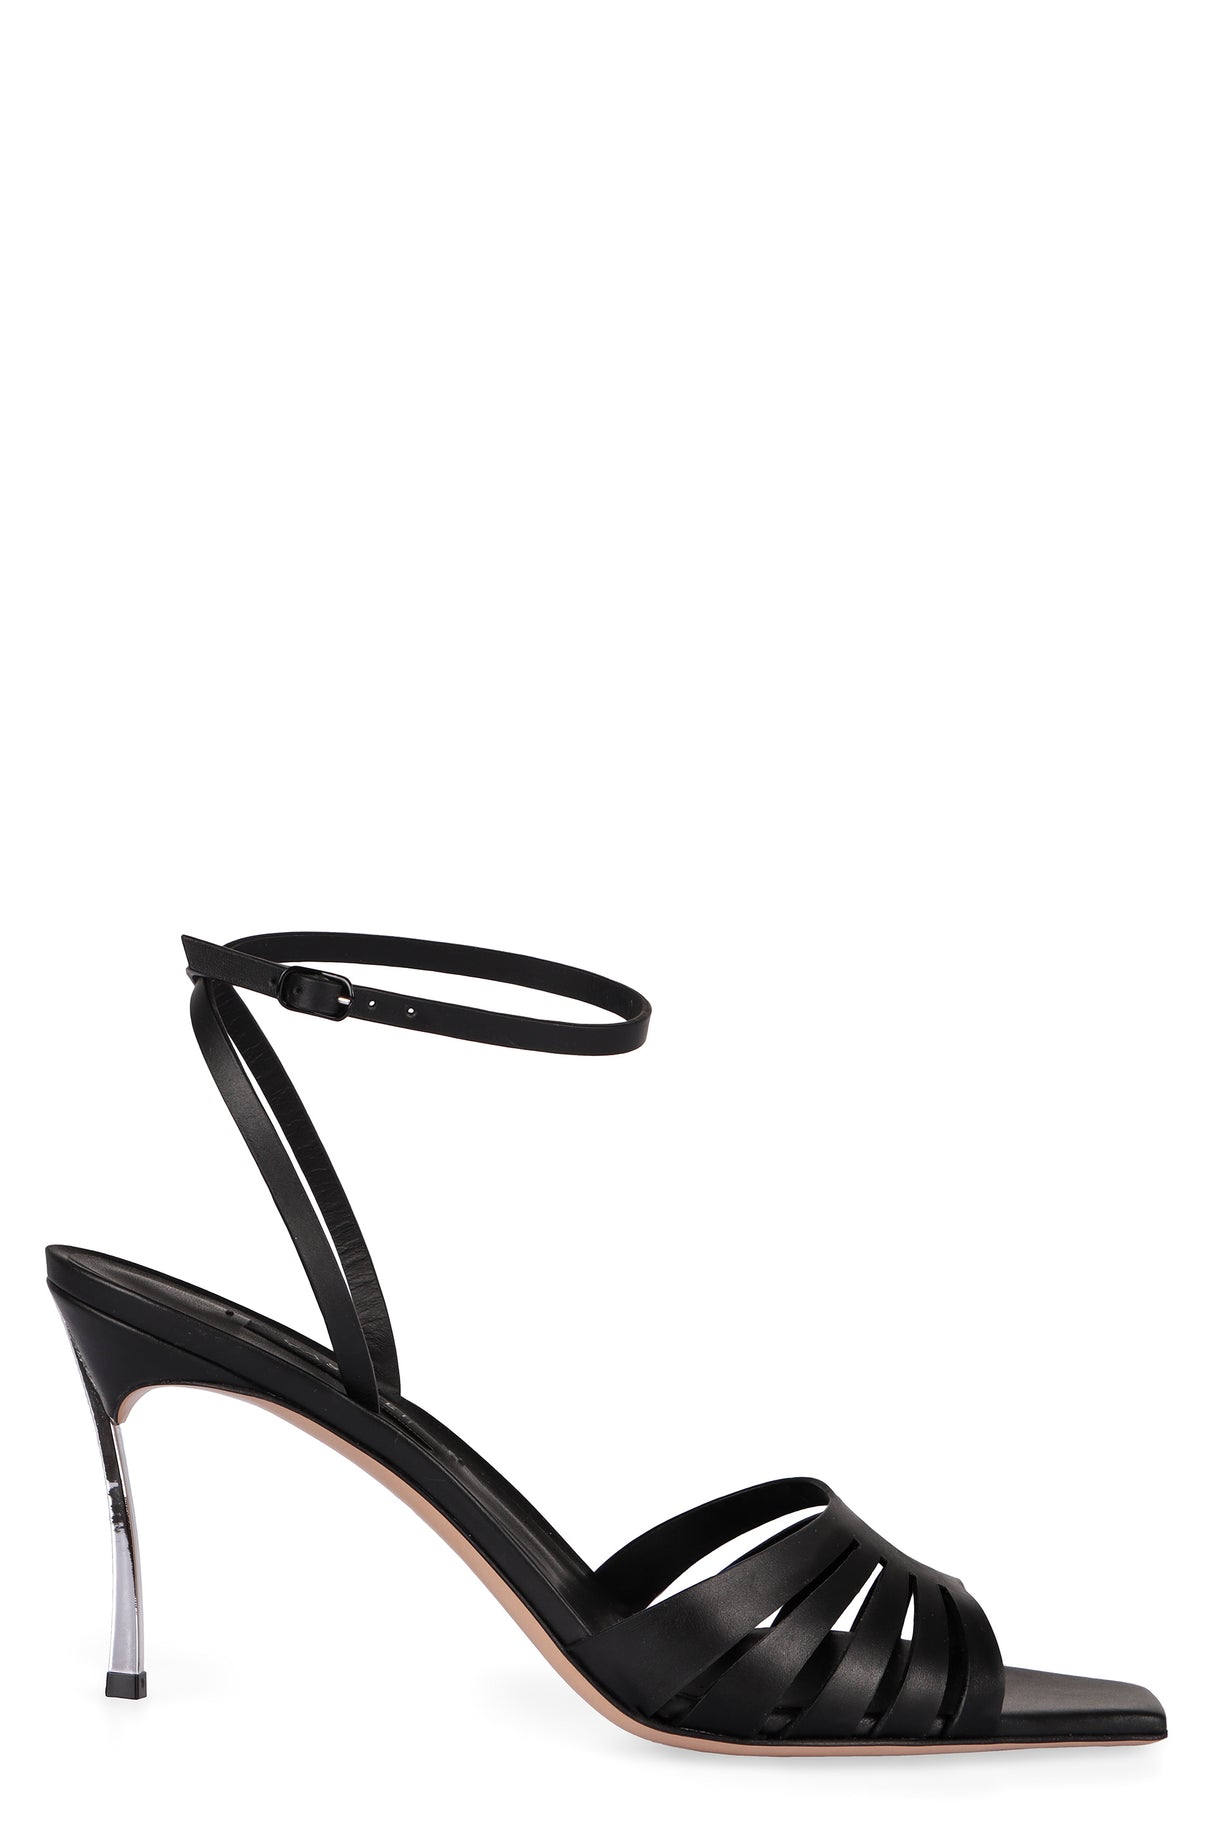 CASADEI Black Leather Sandals with Adjustable Ankle Strap and Square Toe for Women - SS24